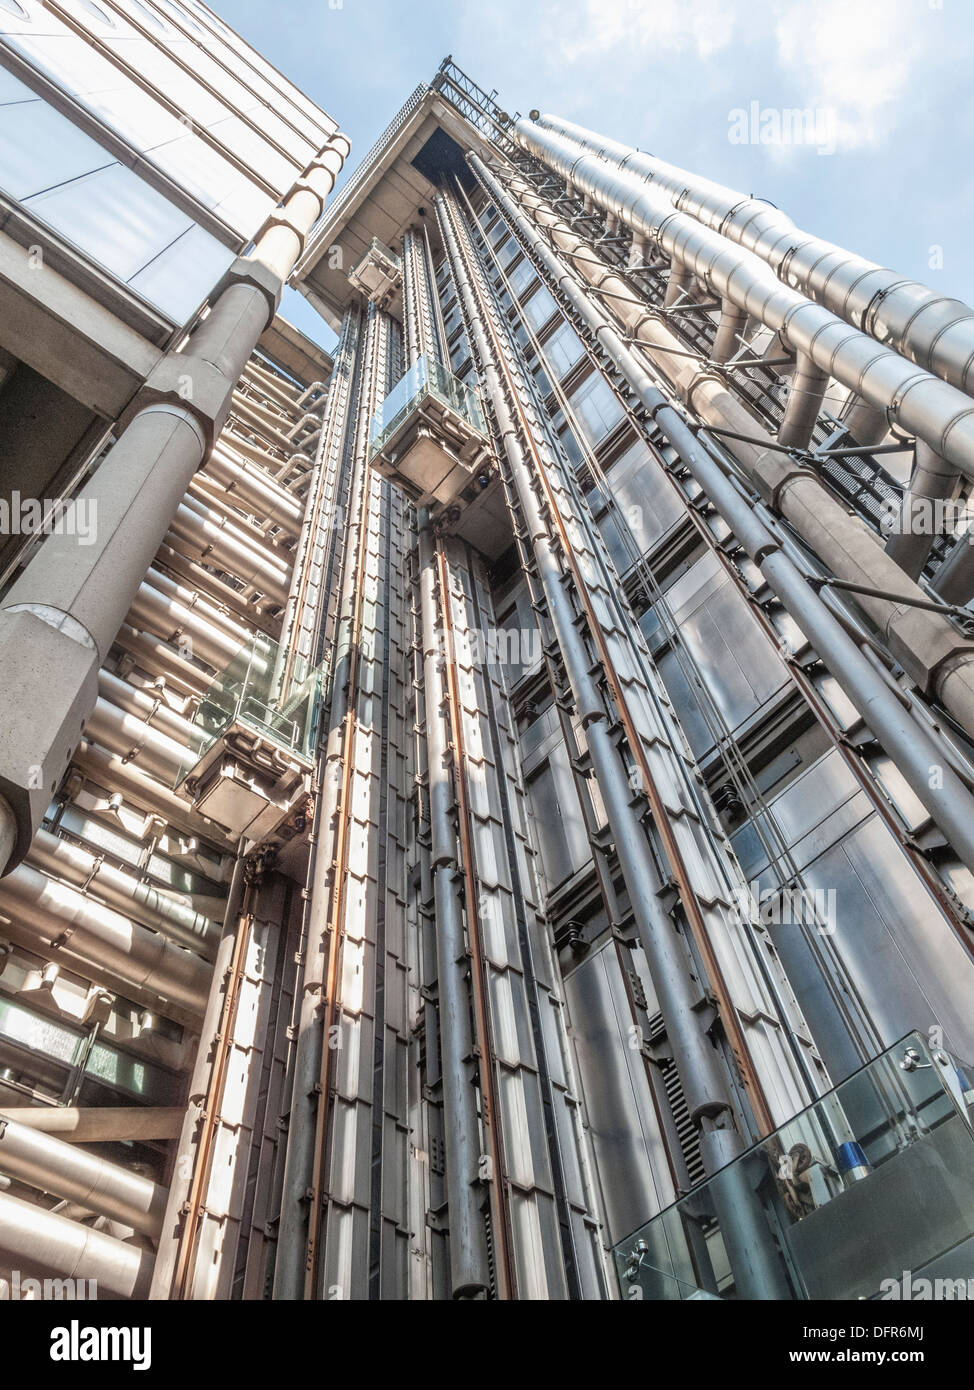 The Lloyd's Building, Lime Street, City of London insurance and financial district, showing its external panoramic lifts Stock Photo